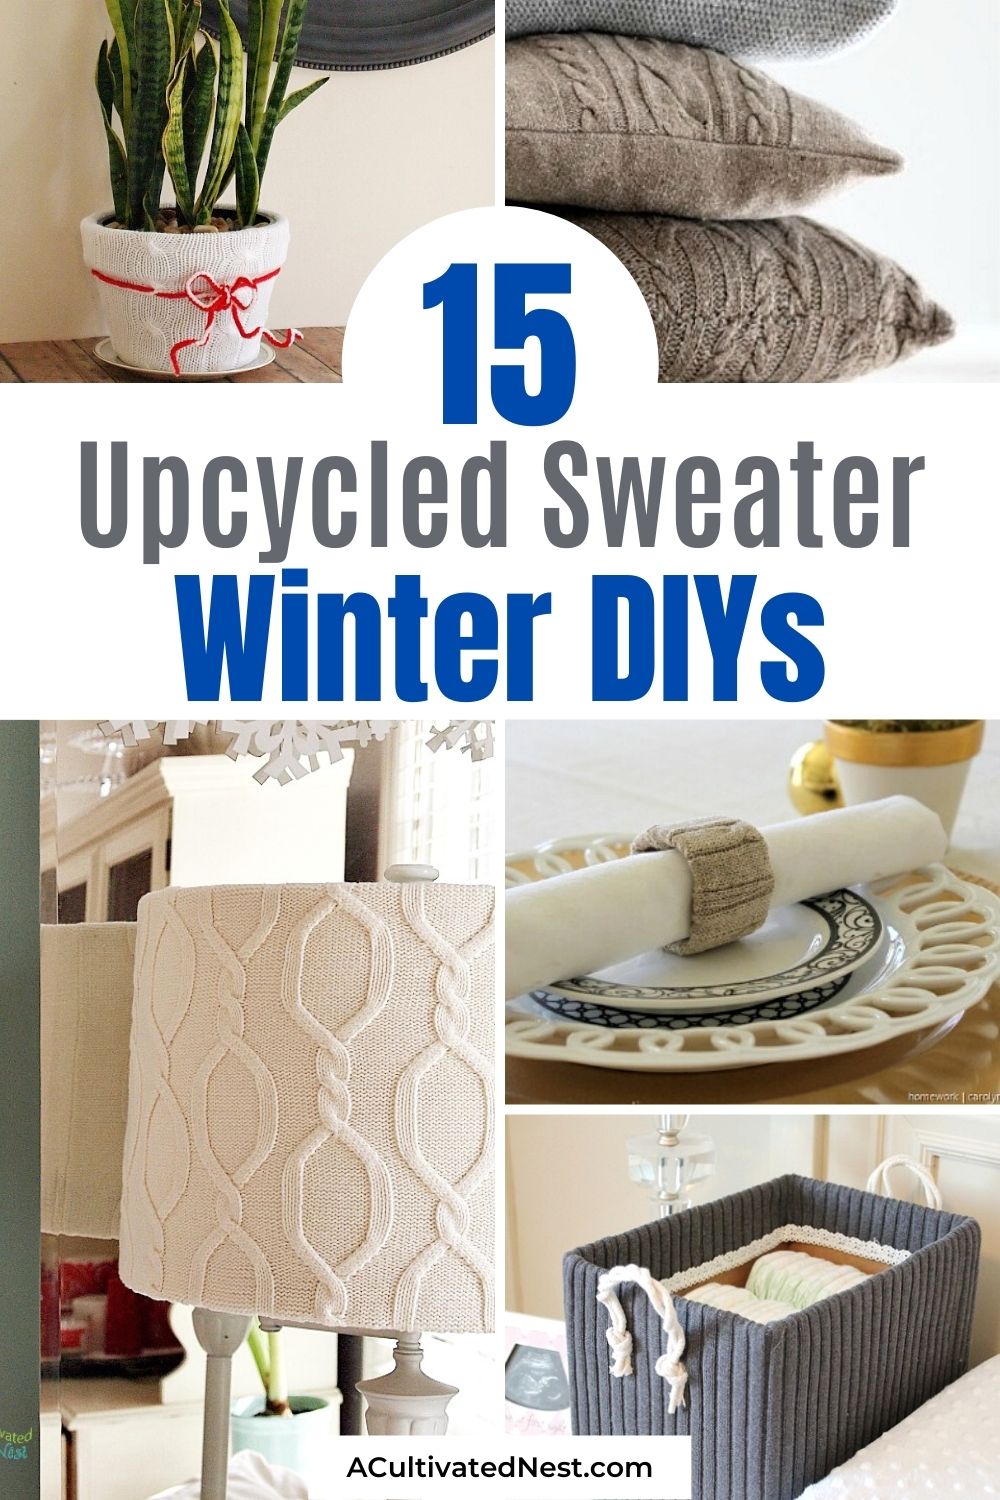 15 Upcycled Sweater Winter Decor DIY Projects- When the holidays are over, your home may feel a bit bare. Make it beautiful again with some of these upcycled sweater winter décor DIY projects! | repurposed sweater DIY, recycled sweater DIY, #upcycle #winterDIY #diyProjects #upcycling #ACultivatedNest